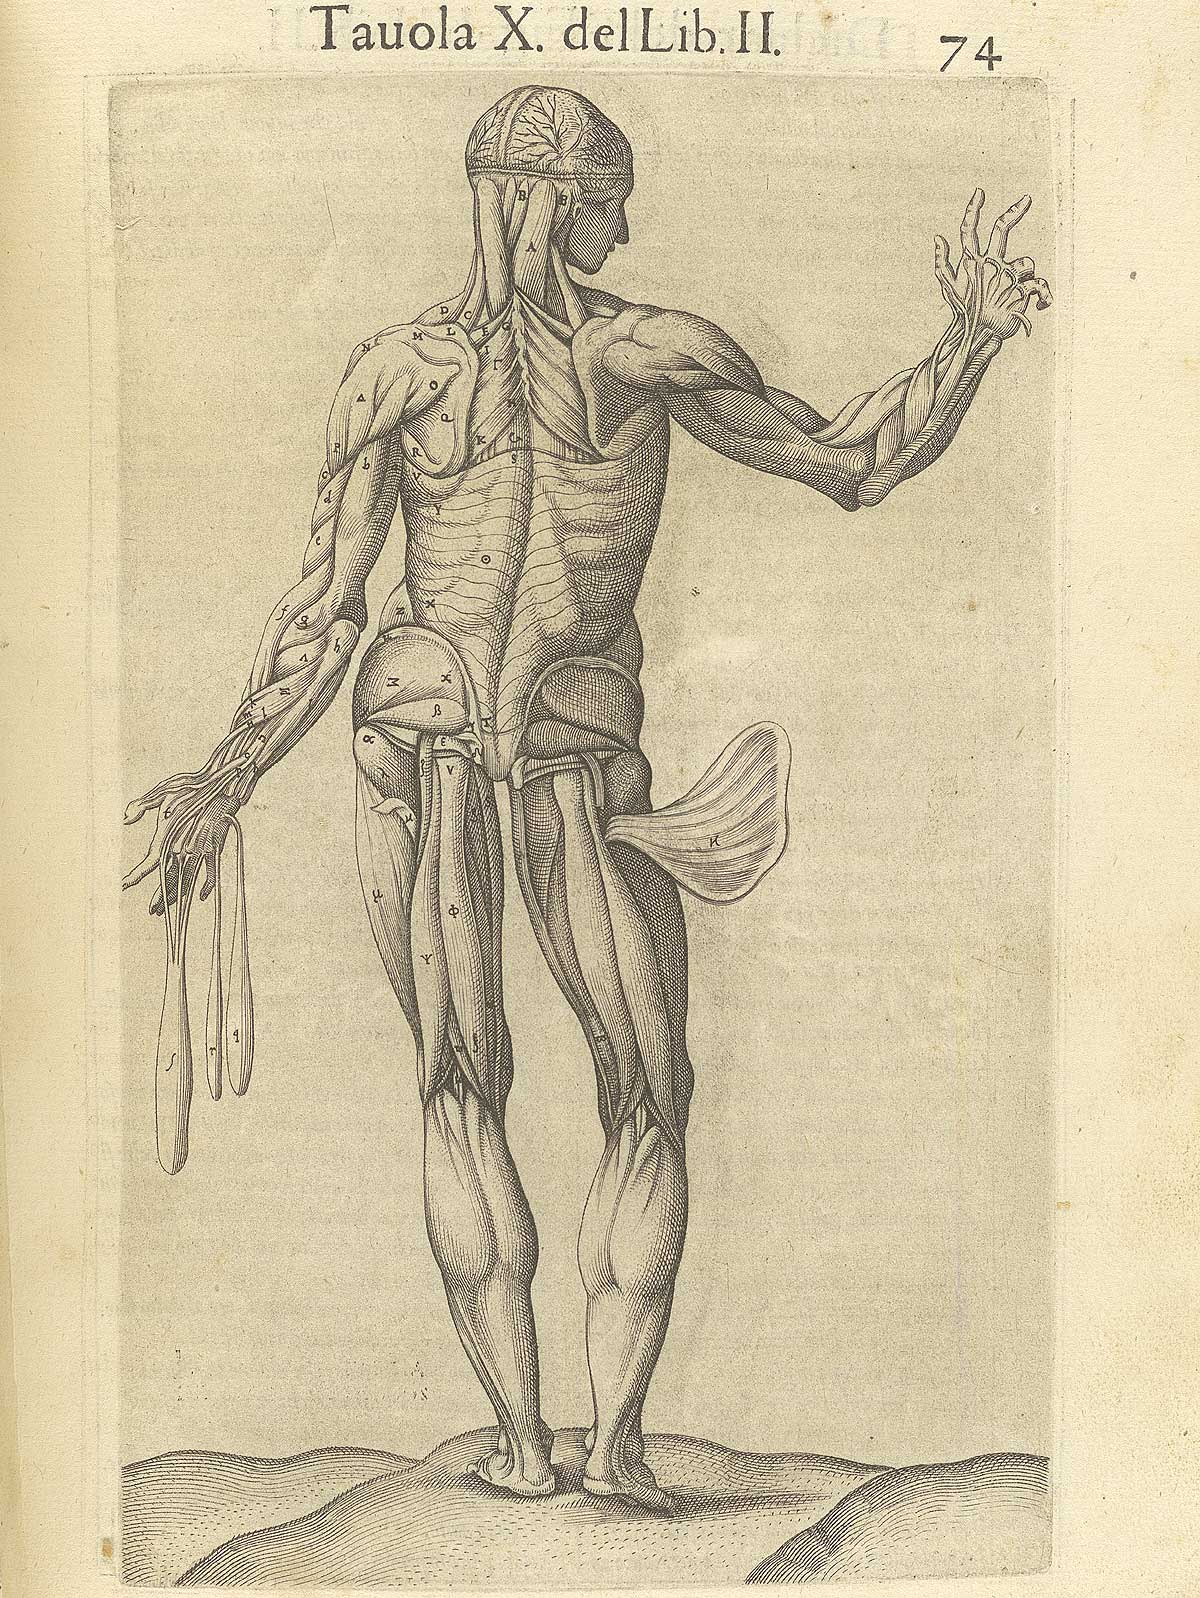 Page 74 of Juan Valverde de Amusco's Anatomia del corpo humano, featuring the backside of a flayed cadaver showing its muscles.